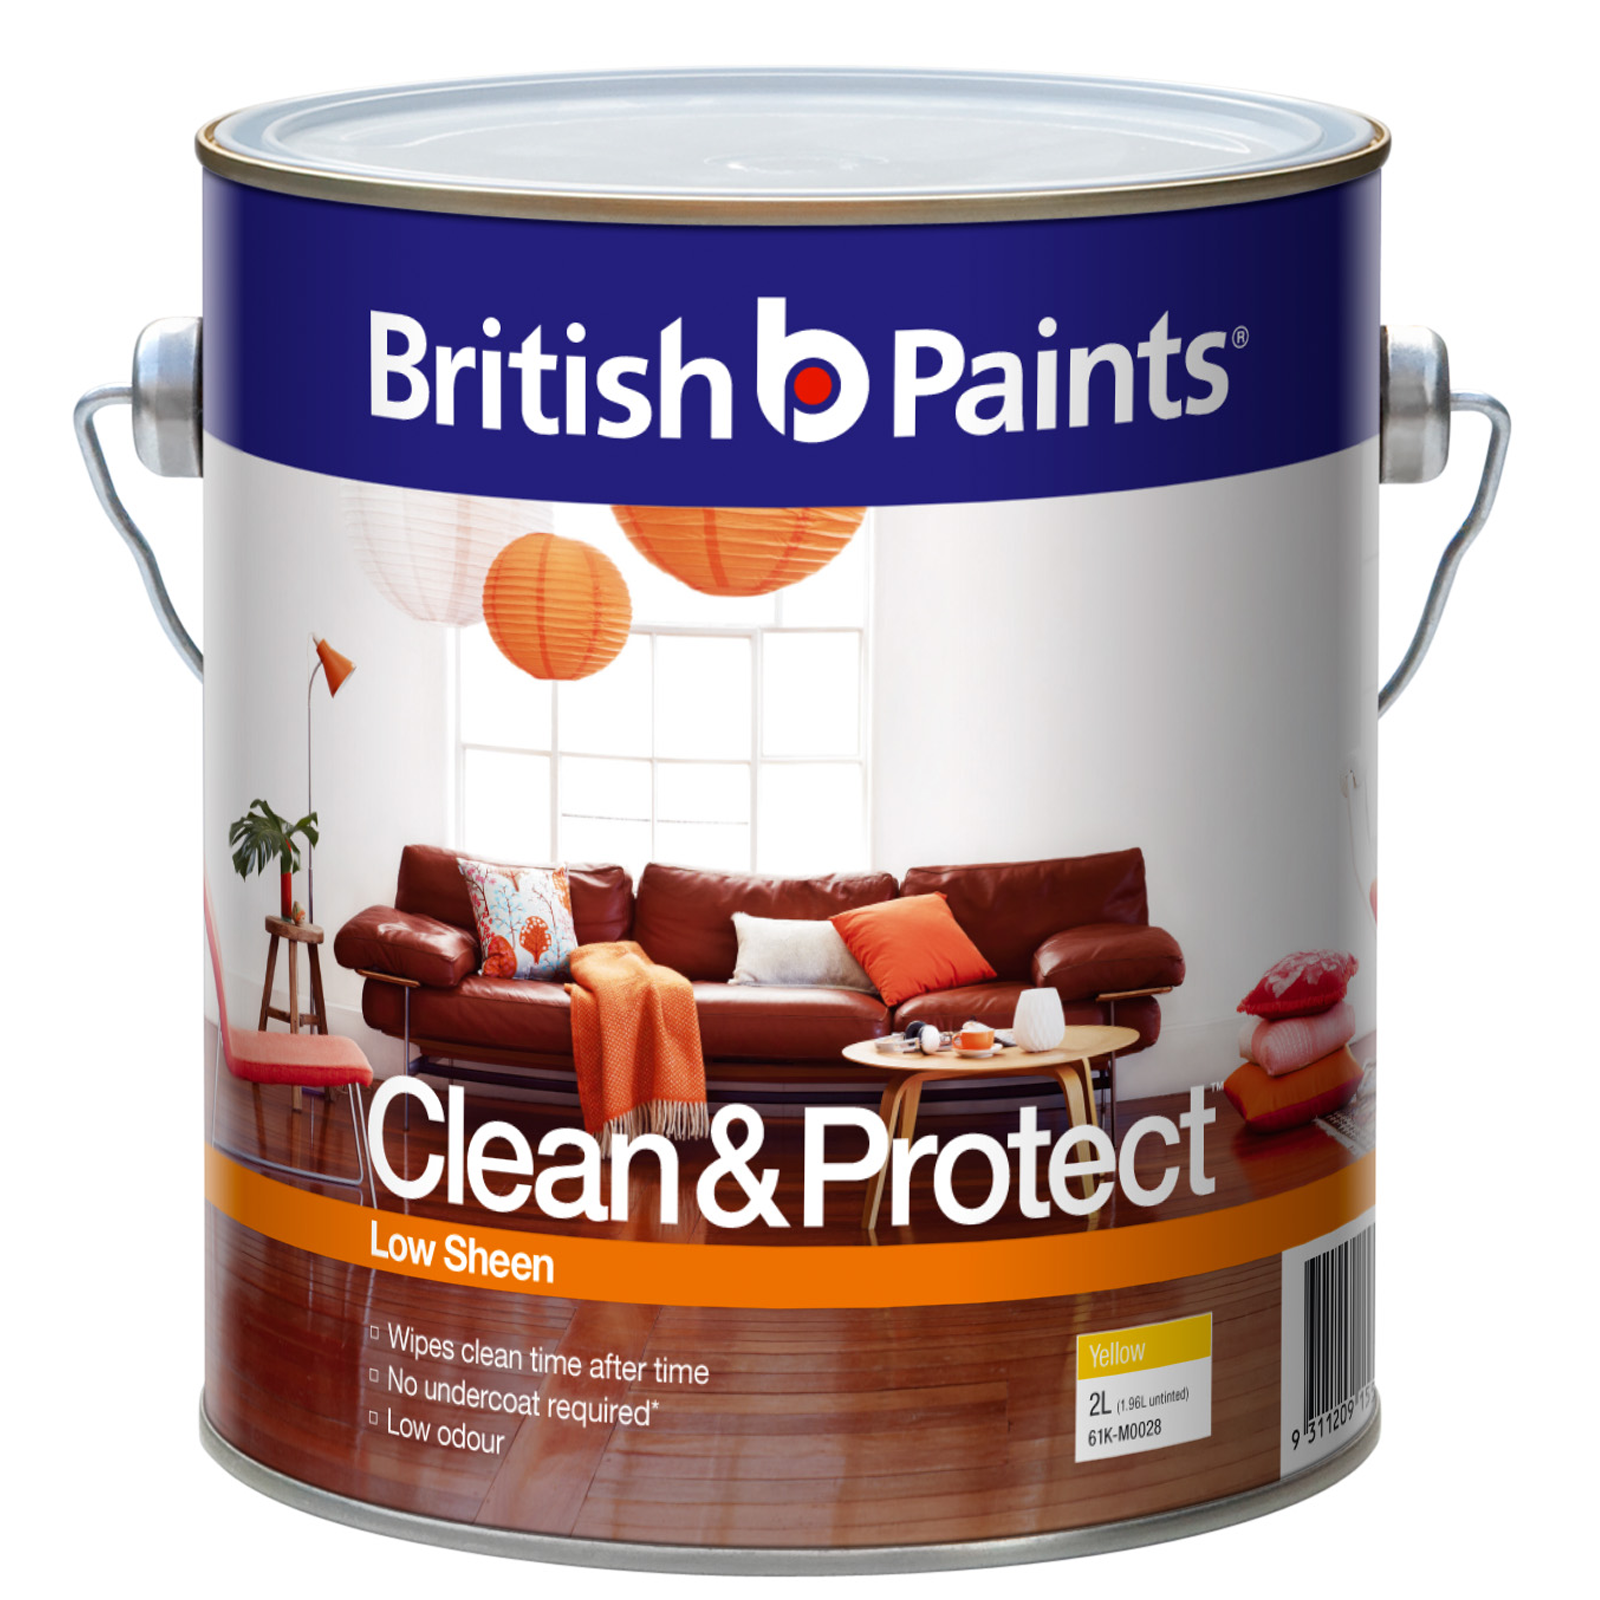 British Paints Clean & Protect 2L Low Sheen Yellow Interior Paint